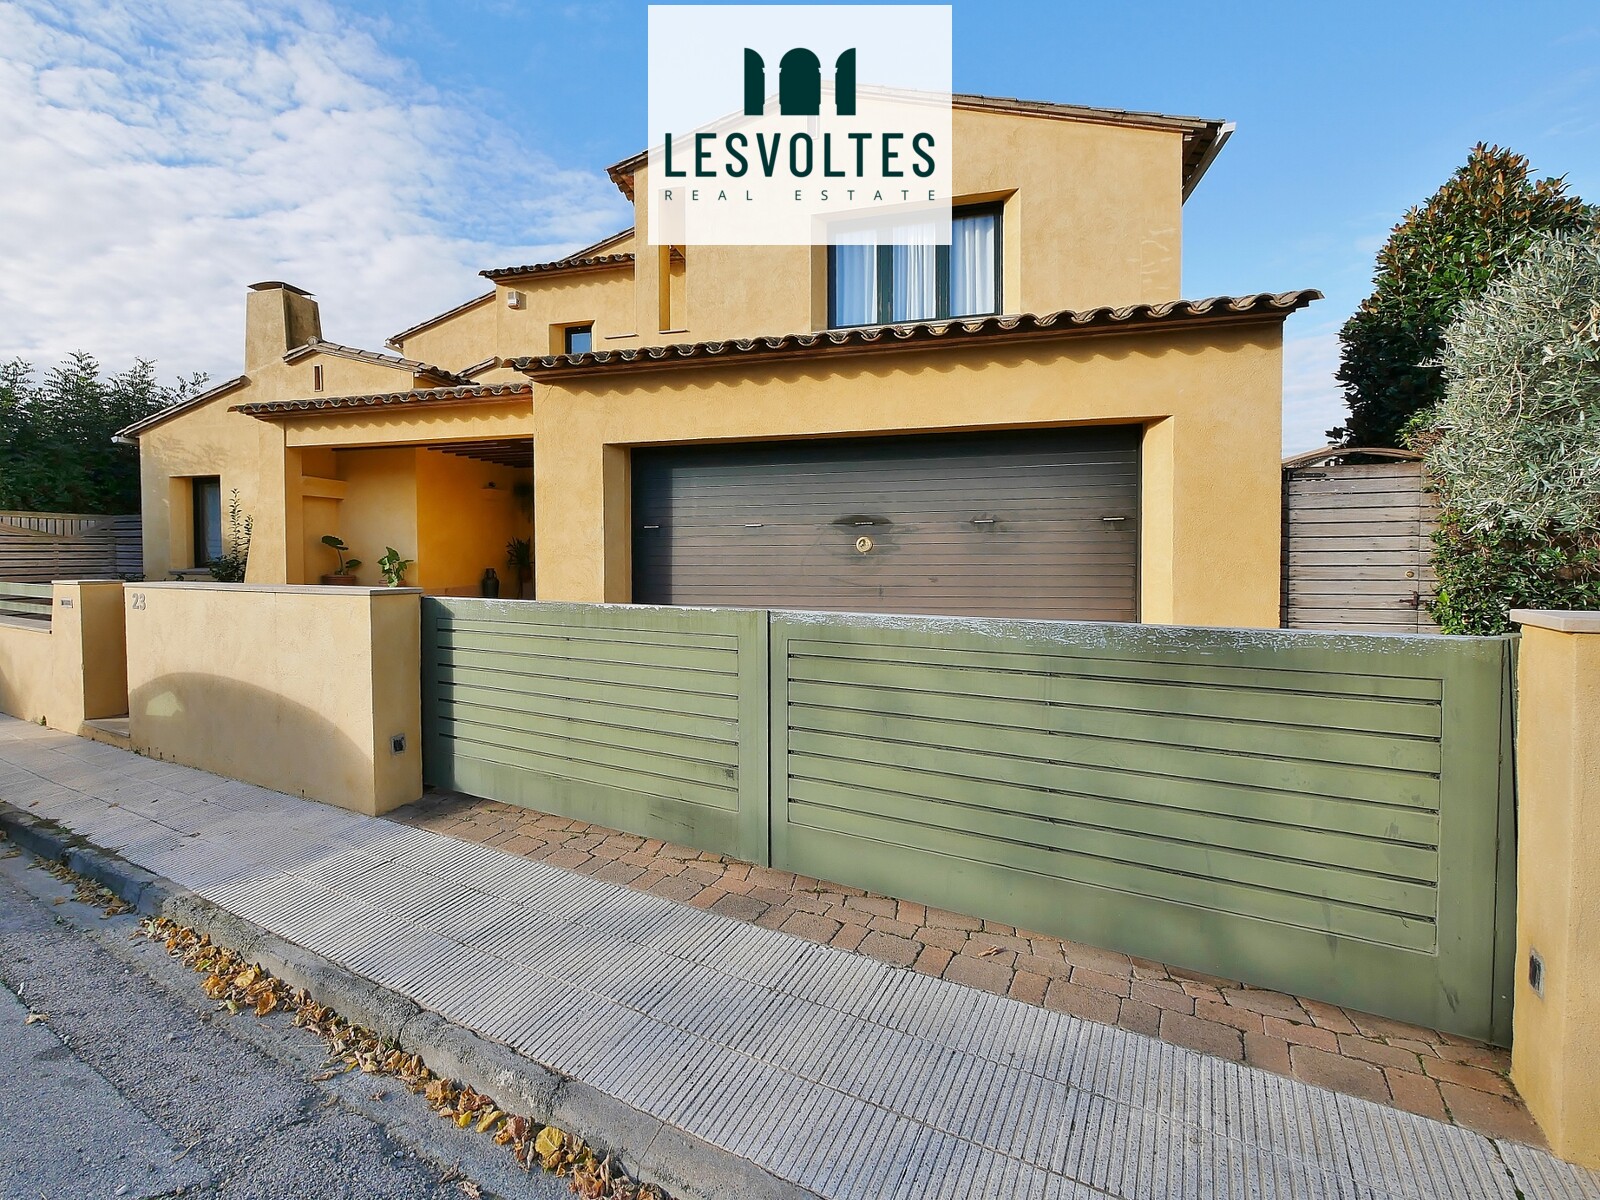 UNIFAMILIAR HOUSE OF 360 M2 WITH 4 ROOMS, GARAGE AND YARD OF 182 M2, FOR SELL IN LA BISBAL D'EMPORDÀ. 